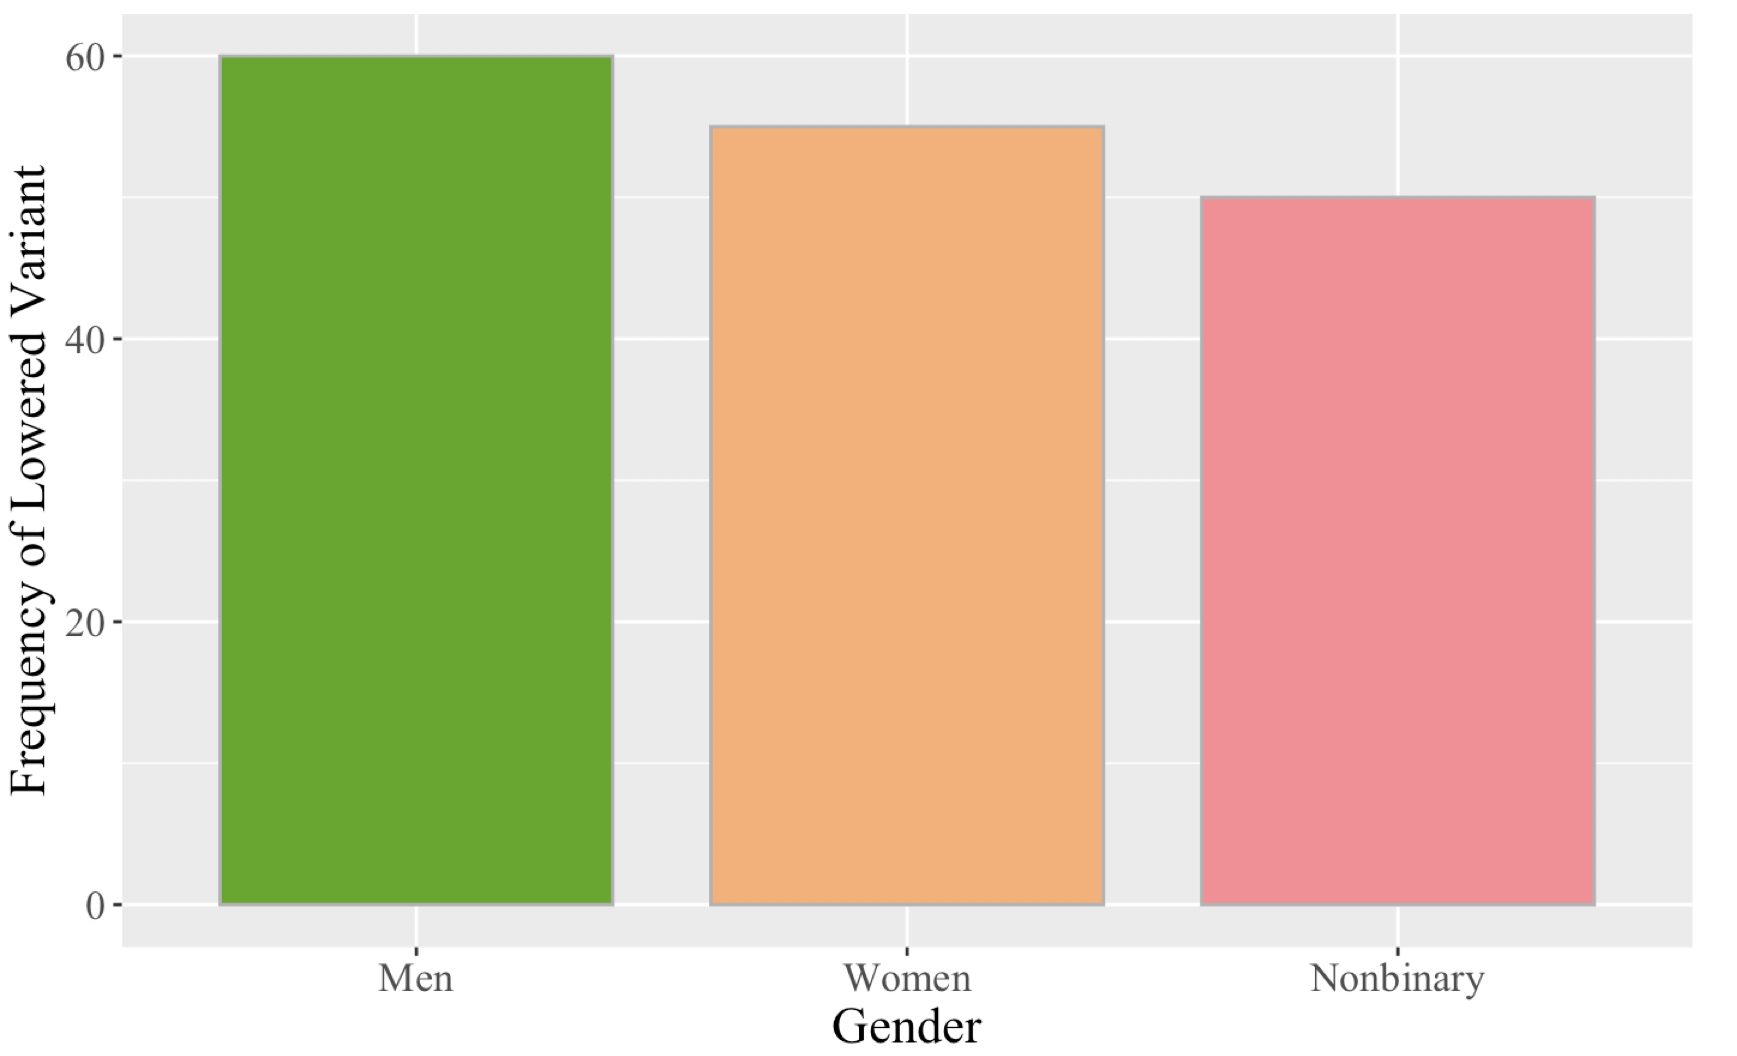 Image of a bar plot. The x-axis has three categories: men women, and nonbinary. Each of these categories has a differently colored bar. The y-axis represents the "Frequency of Lowered Variant". The bar associated with men is at '60'. The bar associated women is at 55. The bar associated with nonbinary people is at 50.